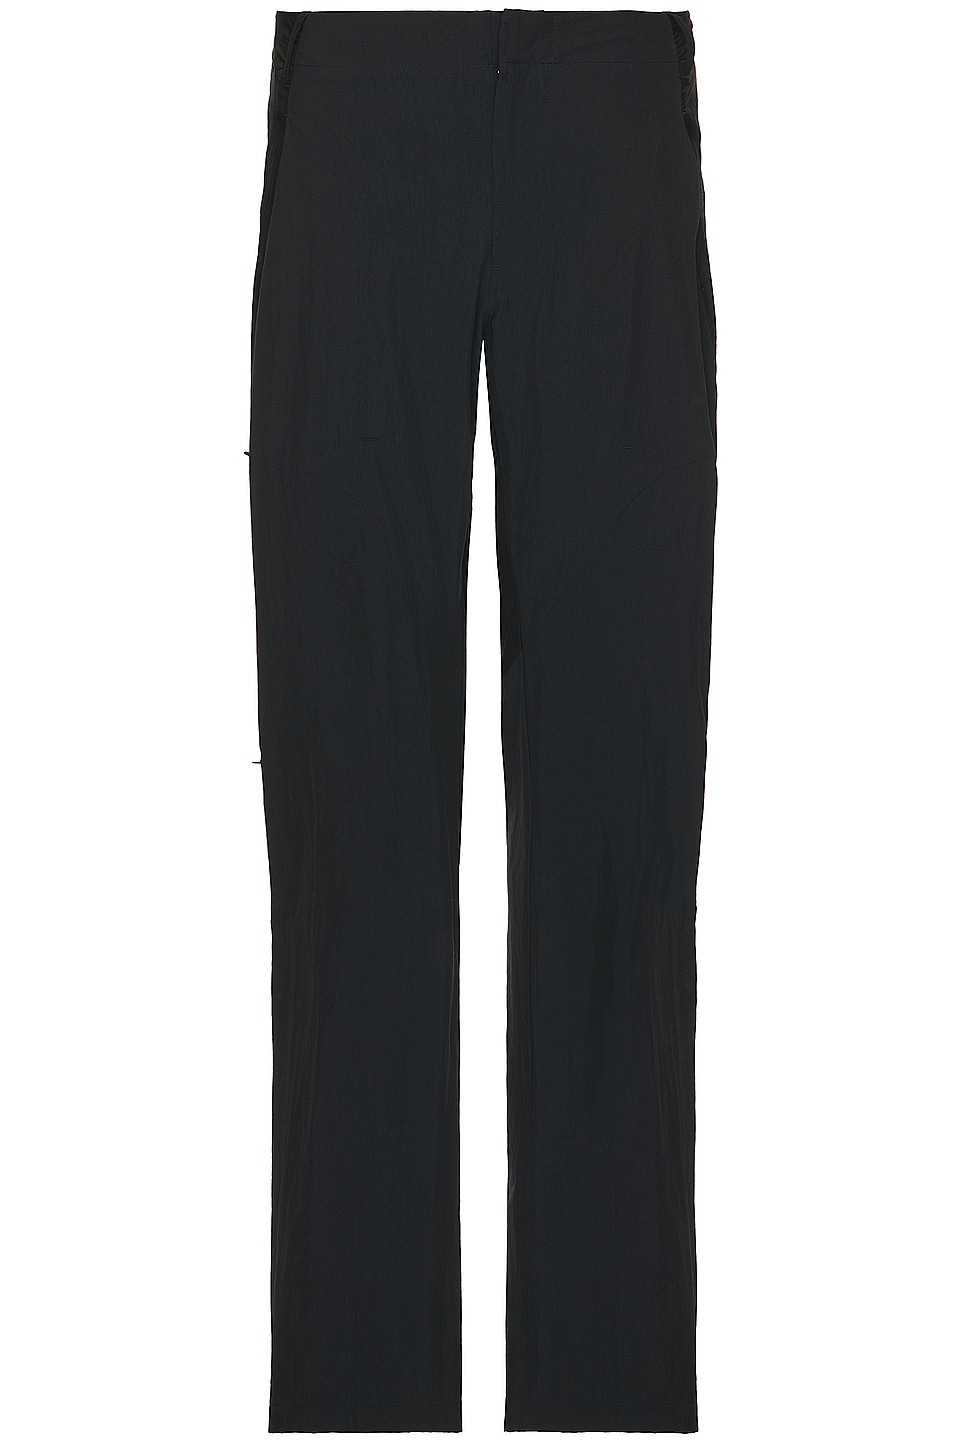 Image 1 of POST ARCHIVE FACTION (PAF) 6.0 Trousers in Black